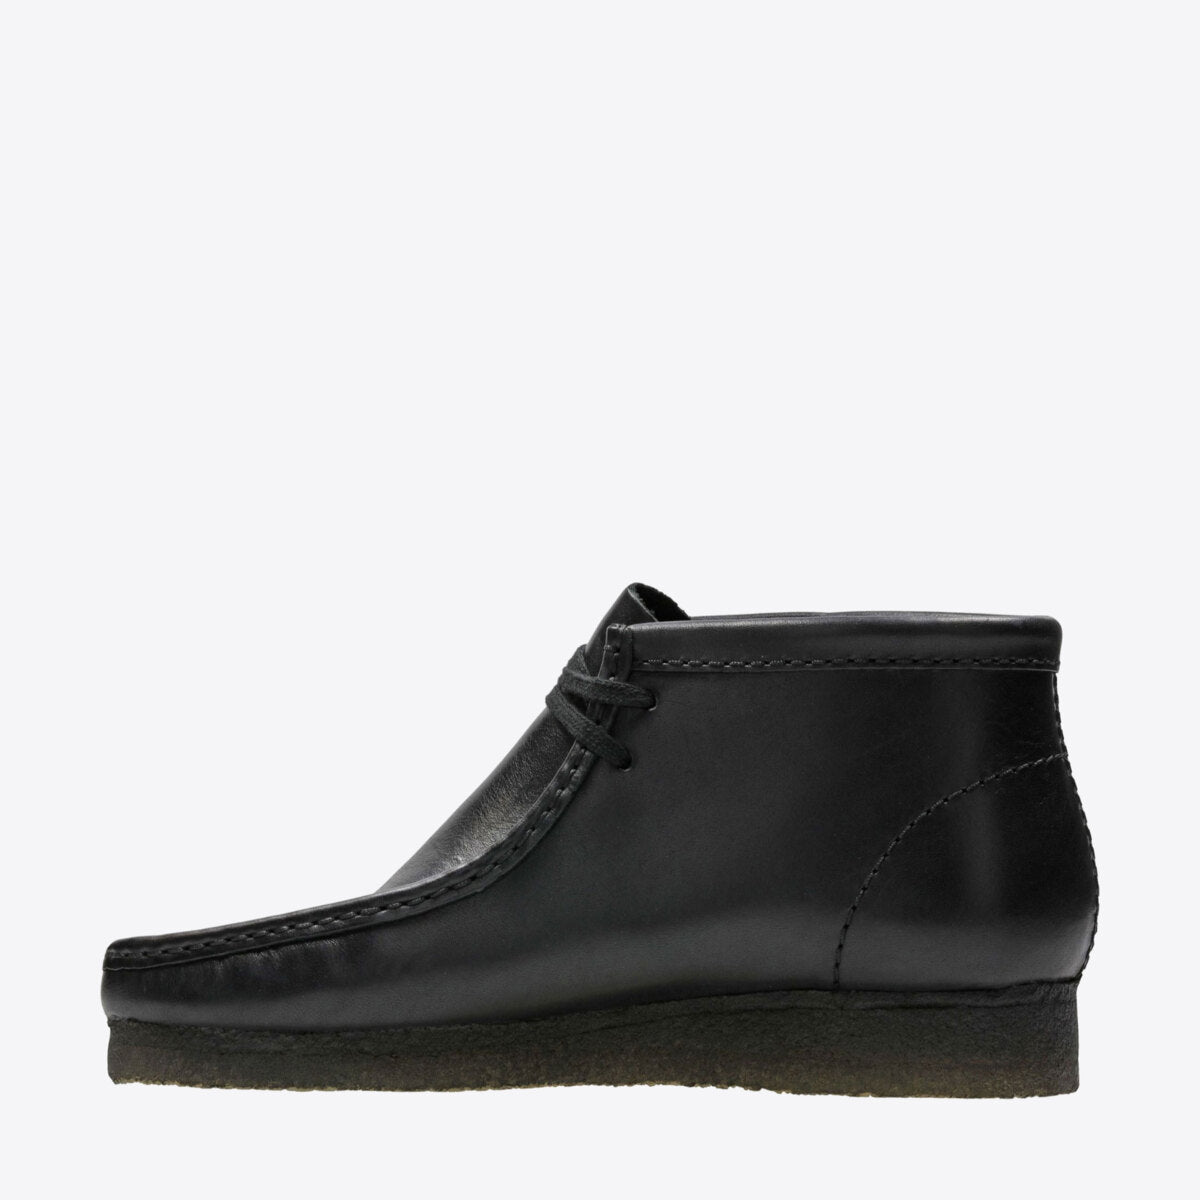 CLARKS Wallabee Boot Leather Black - Image 0